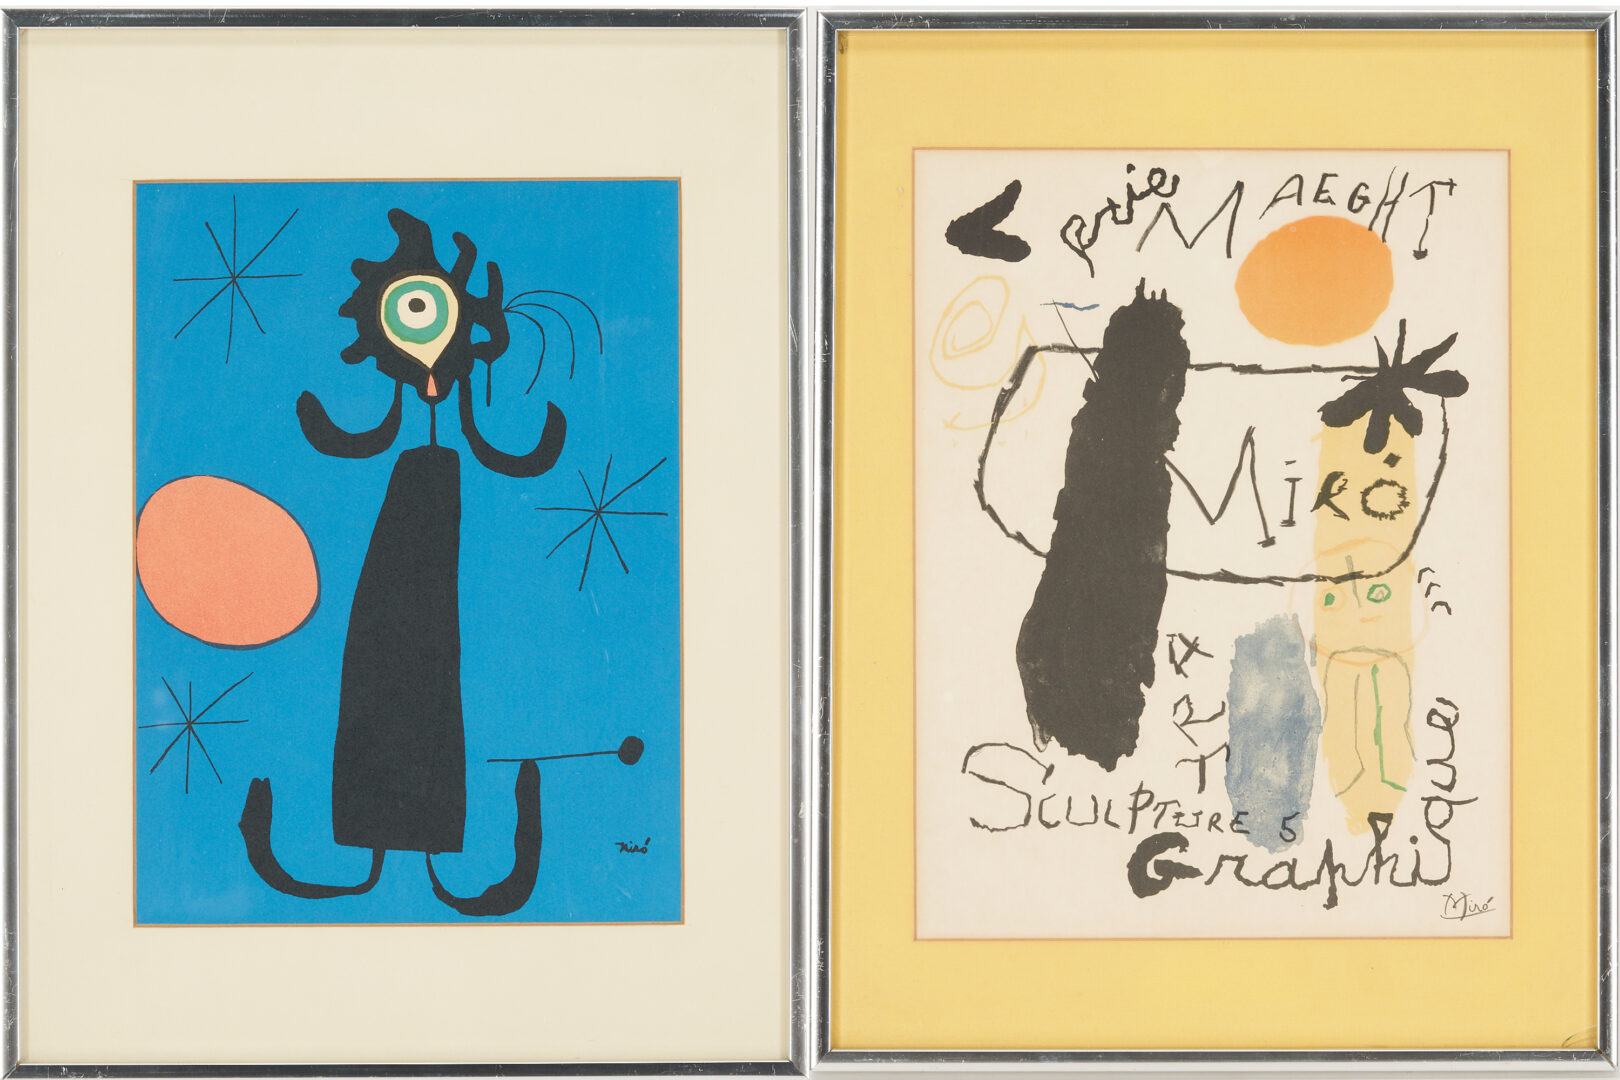 Lot 870: 2 Lithographs After Miro, Galerie Maeght Exhibition & Mujer Ante el Sol